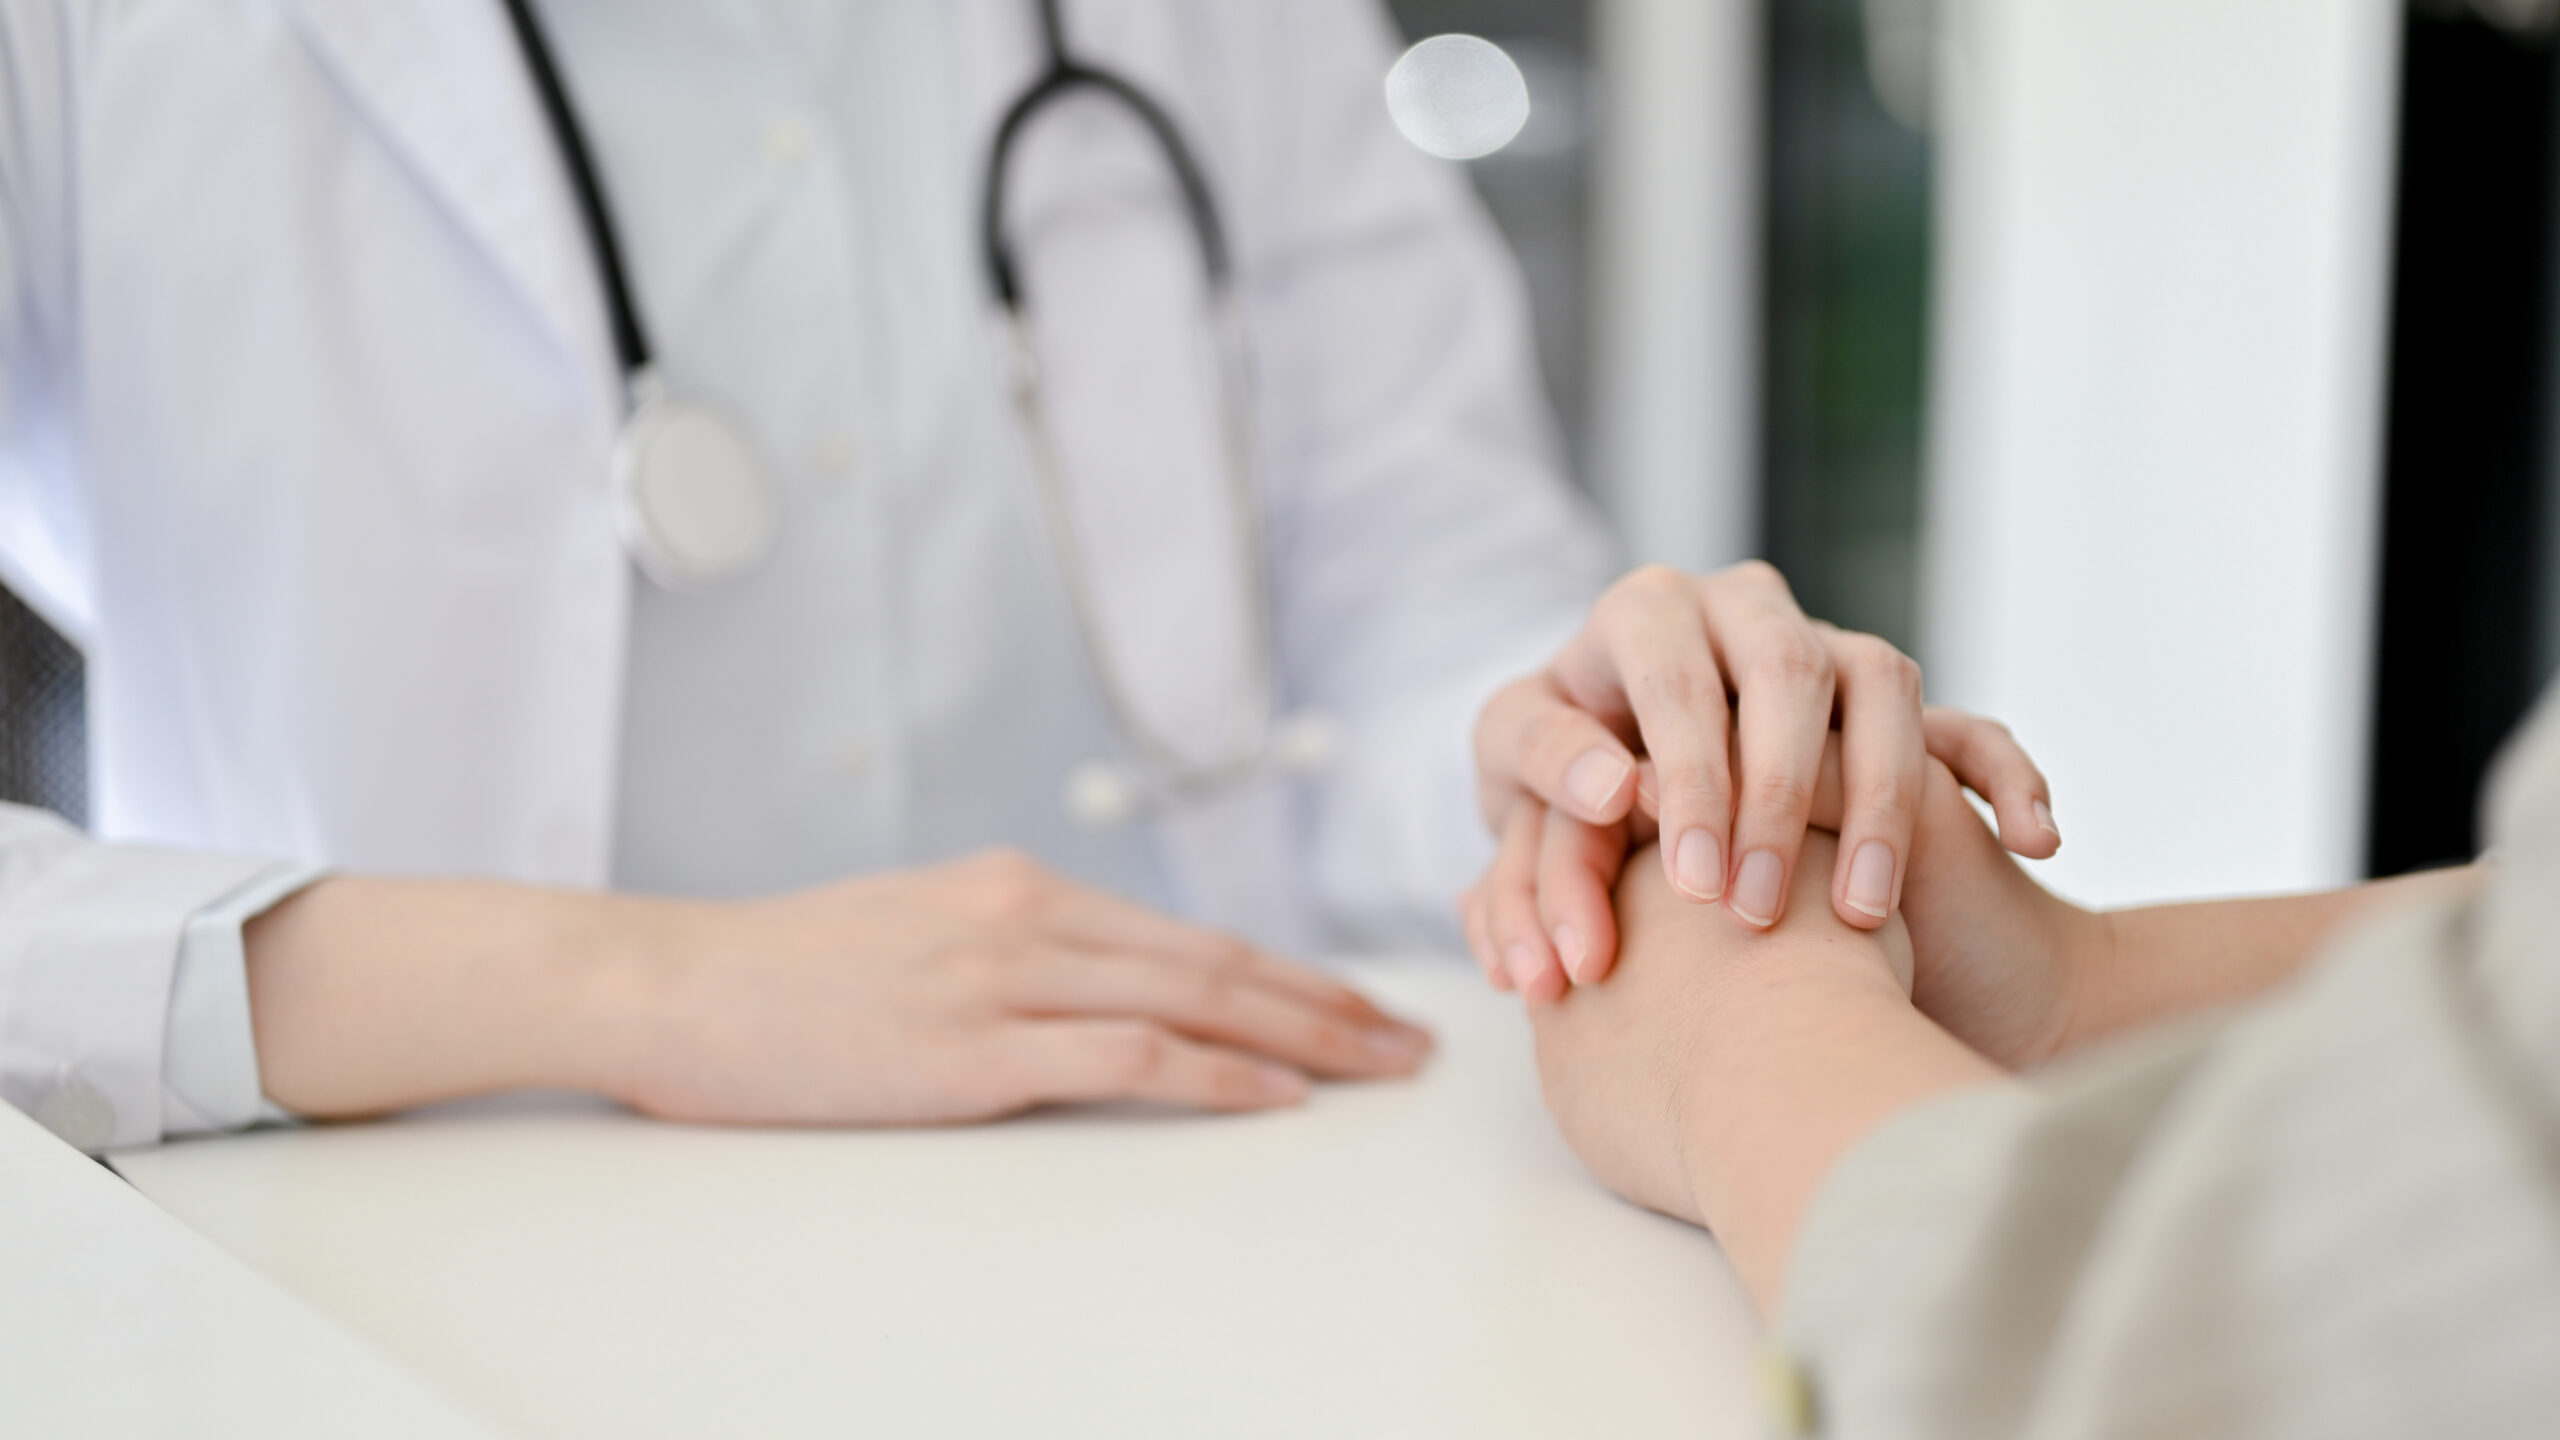 Close-up image of a caring female doctor holding a patient’s hands to comfort her during the meeting